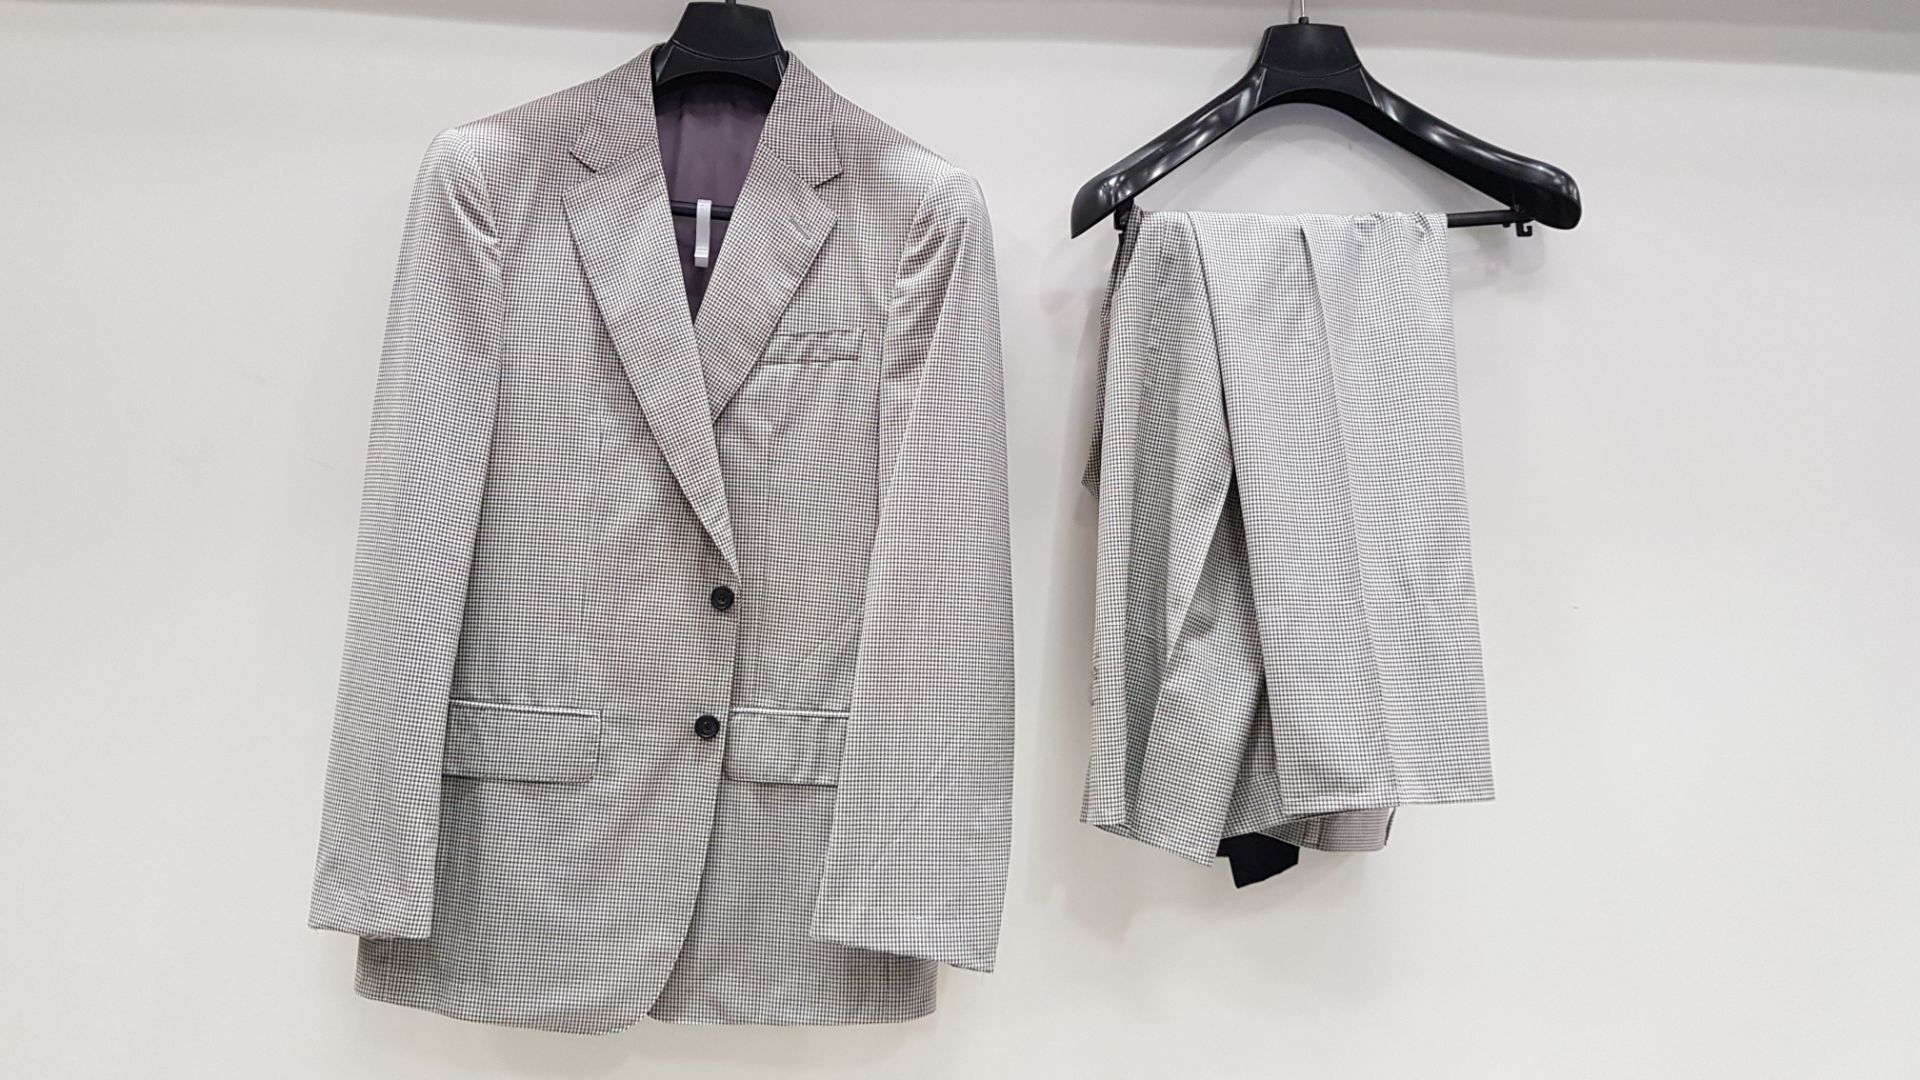 3 X BRAND NEW LUTWYCHE HAND TAILORED LIGHT GREY PATTERNED SUITS SIZE 38R AND 46R (PLEASE NOTE